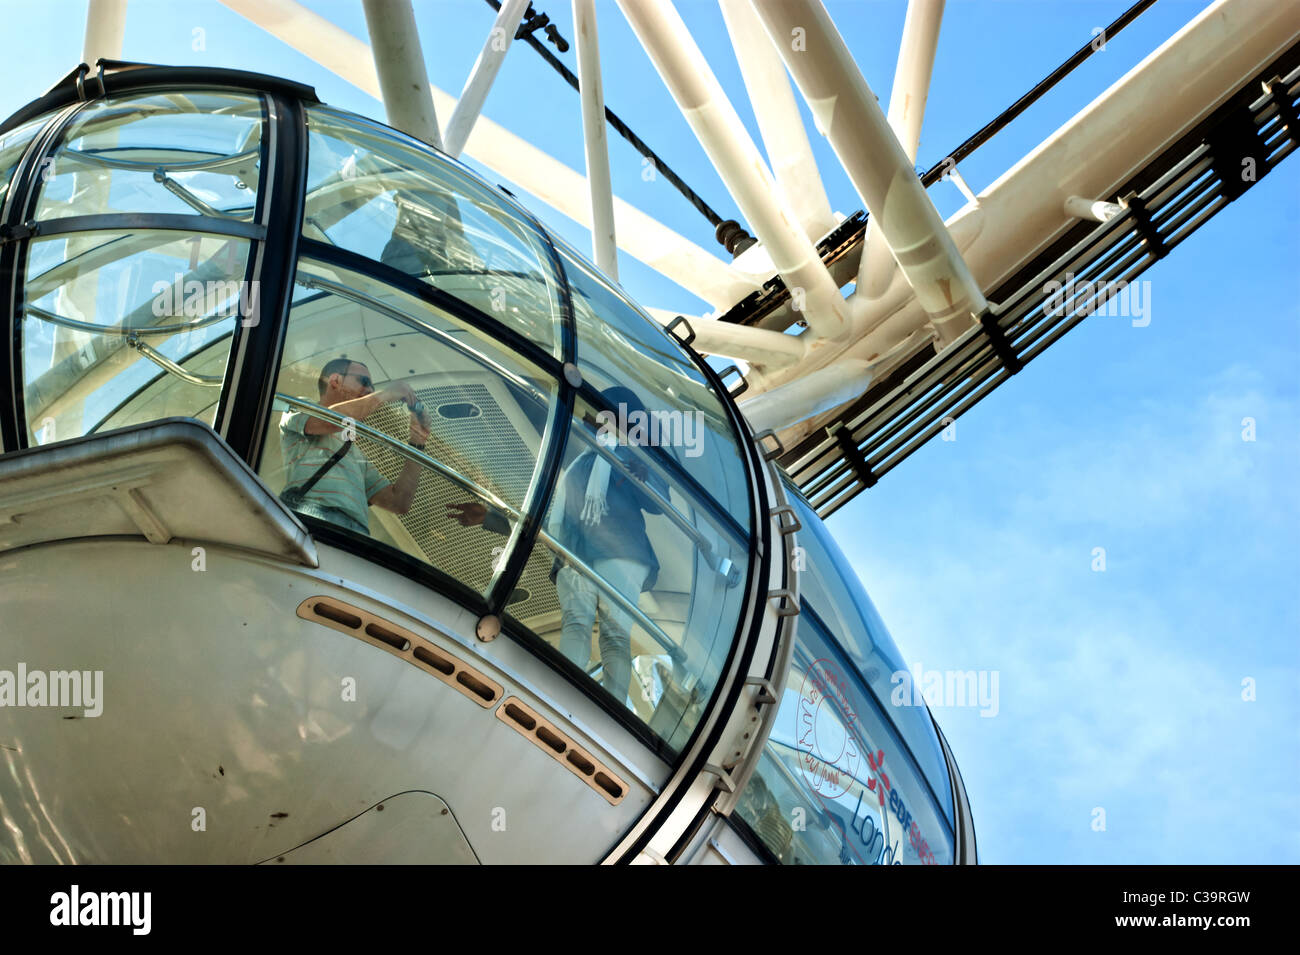 A close-up shot of one of the cars on the London eye. A  couple on board,  take fotos of each other. 2011. Stock Photo